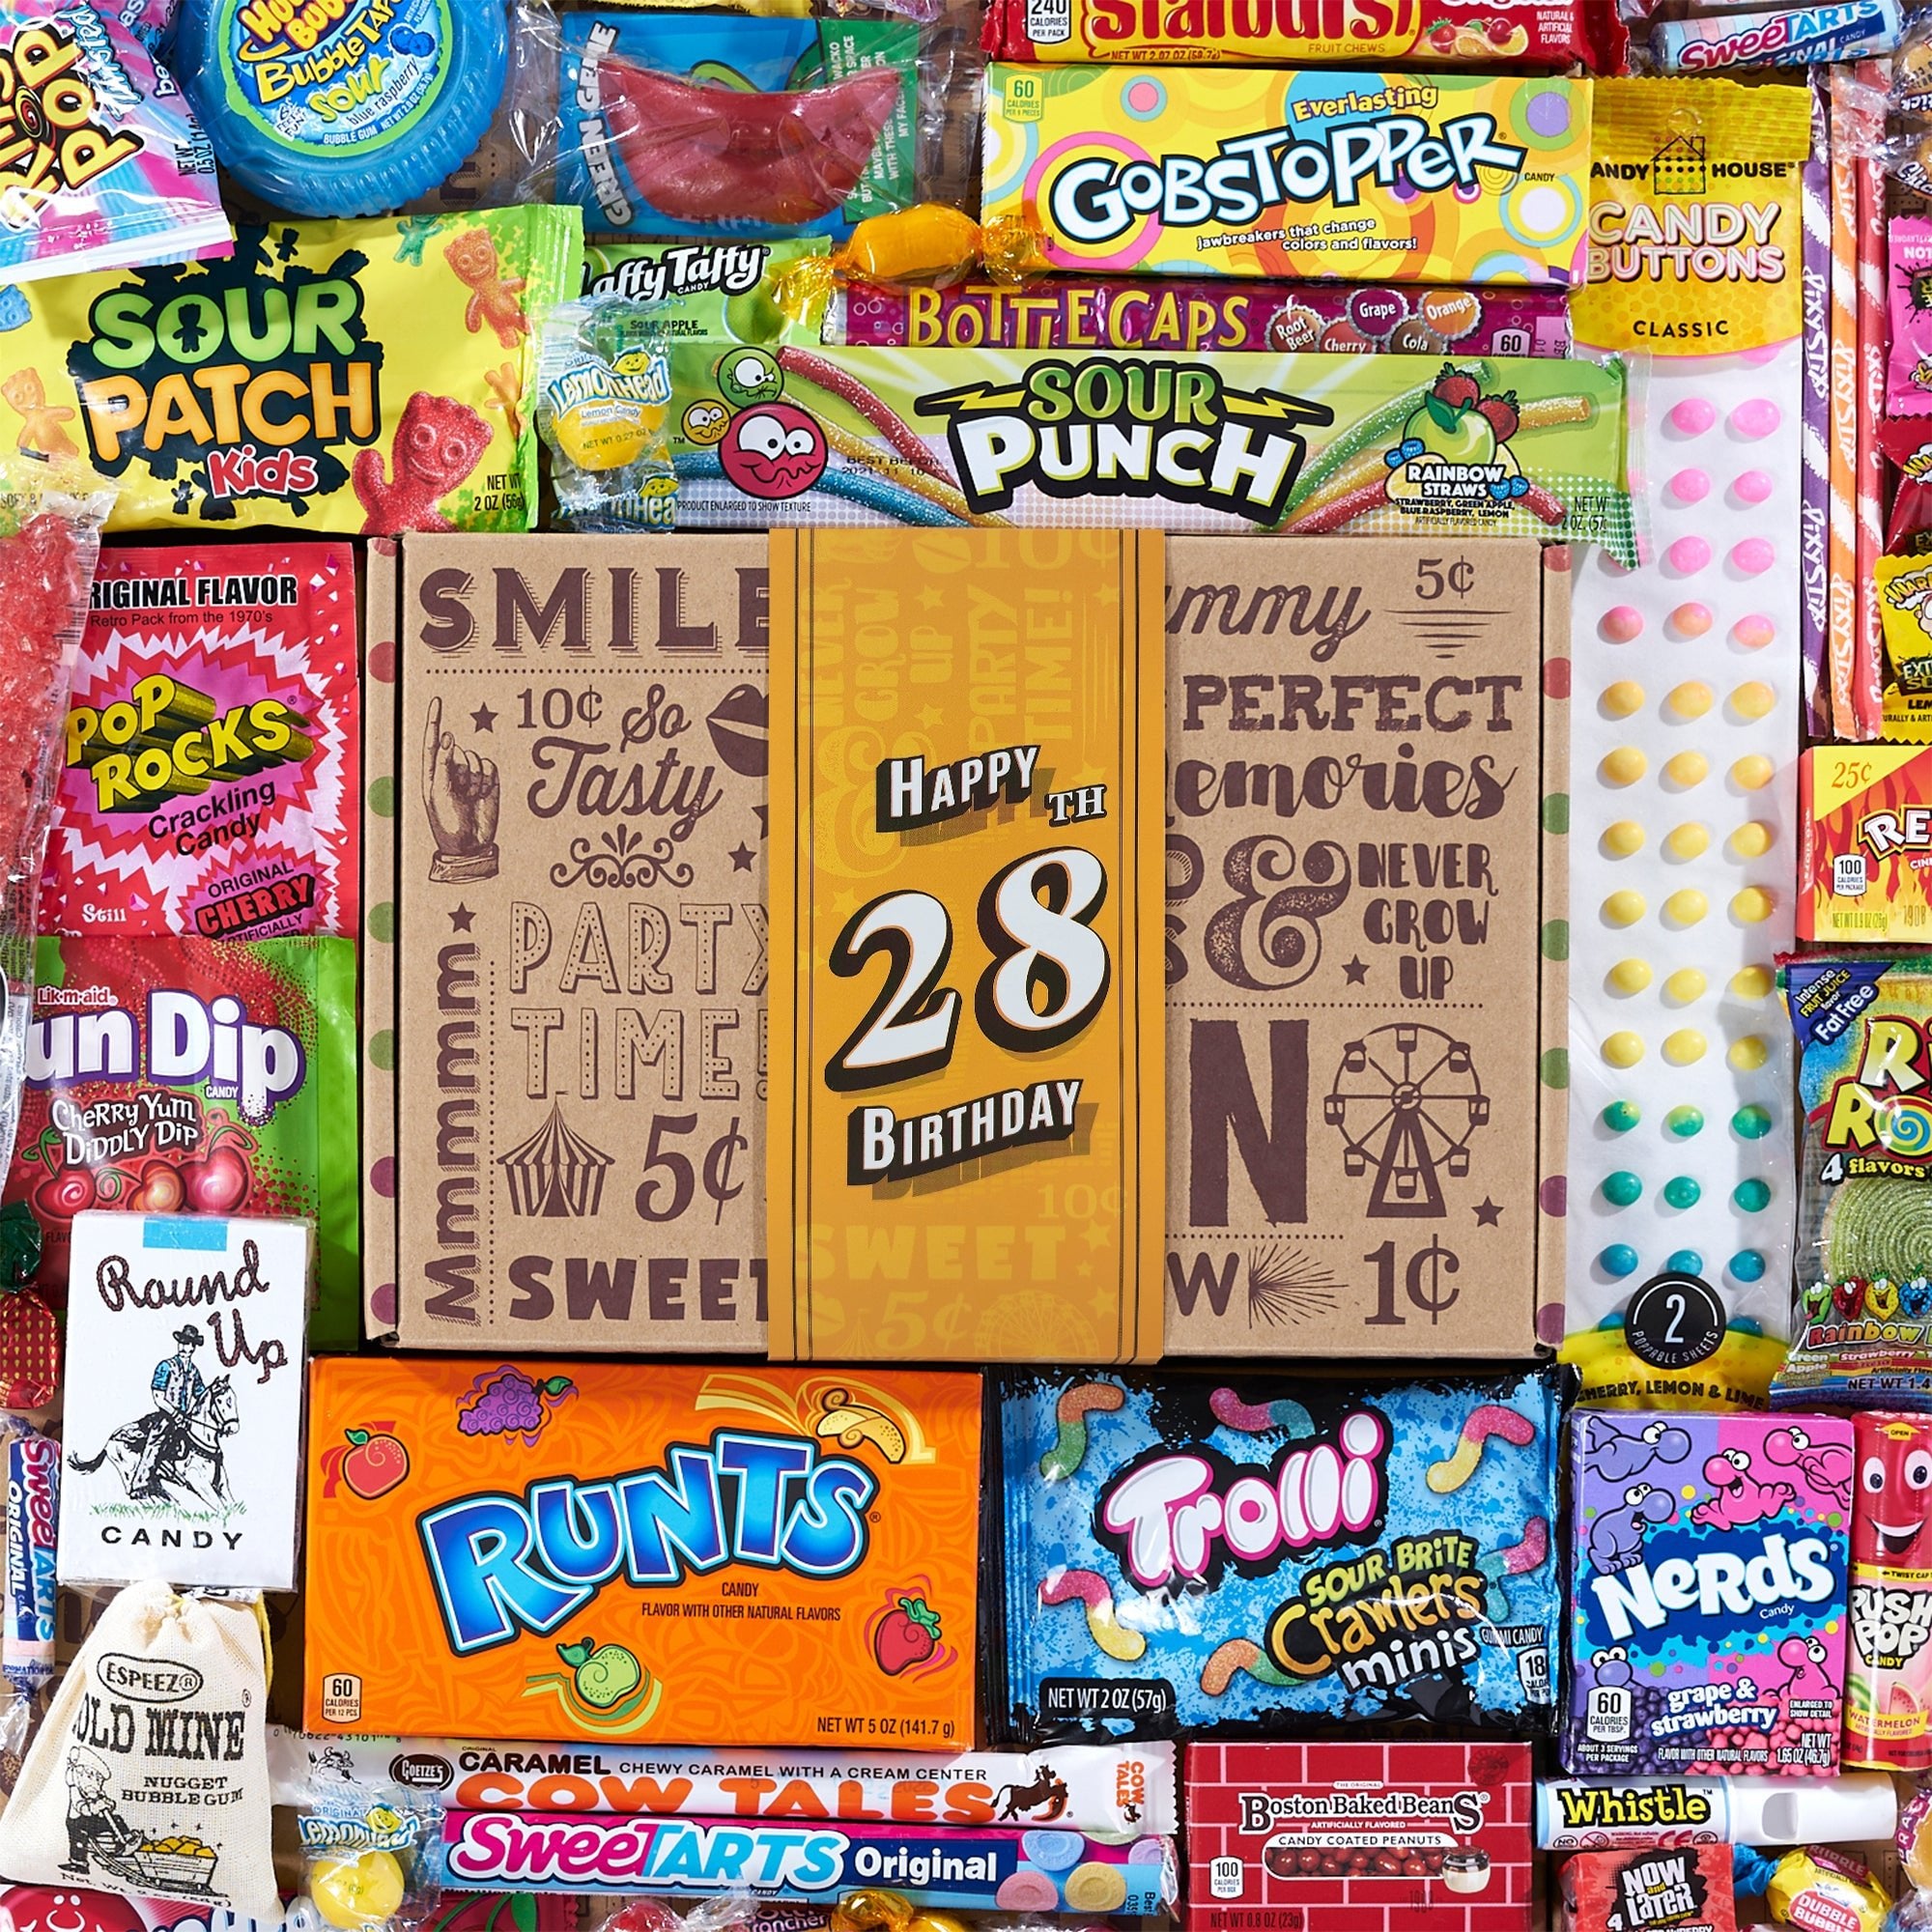 28th Birthday Retro Candy Gift - Vintage Candy Co.